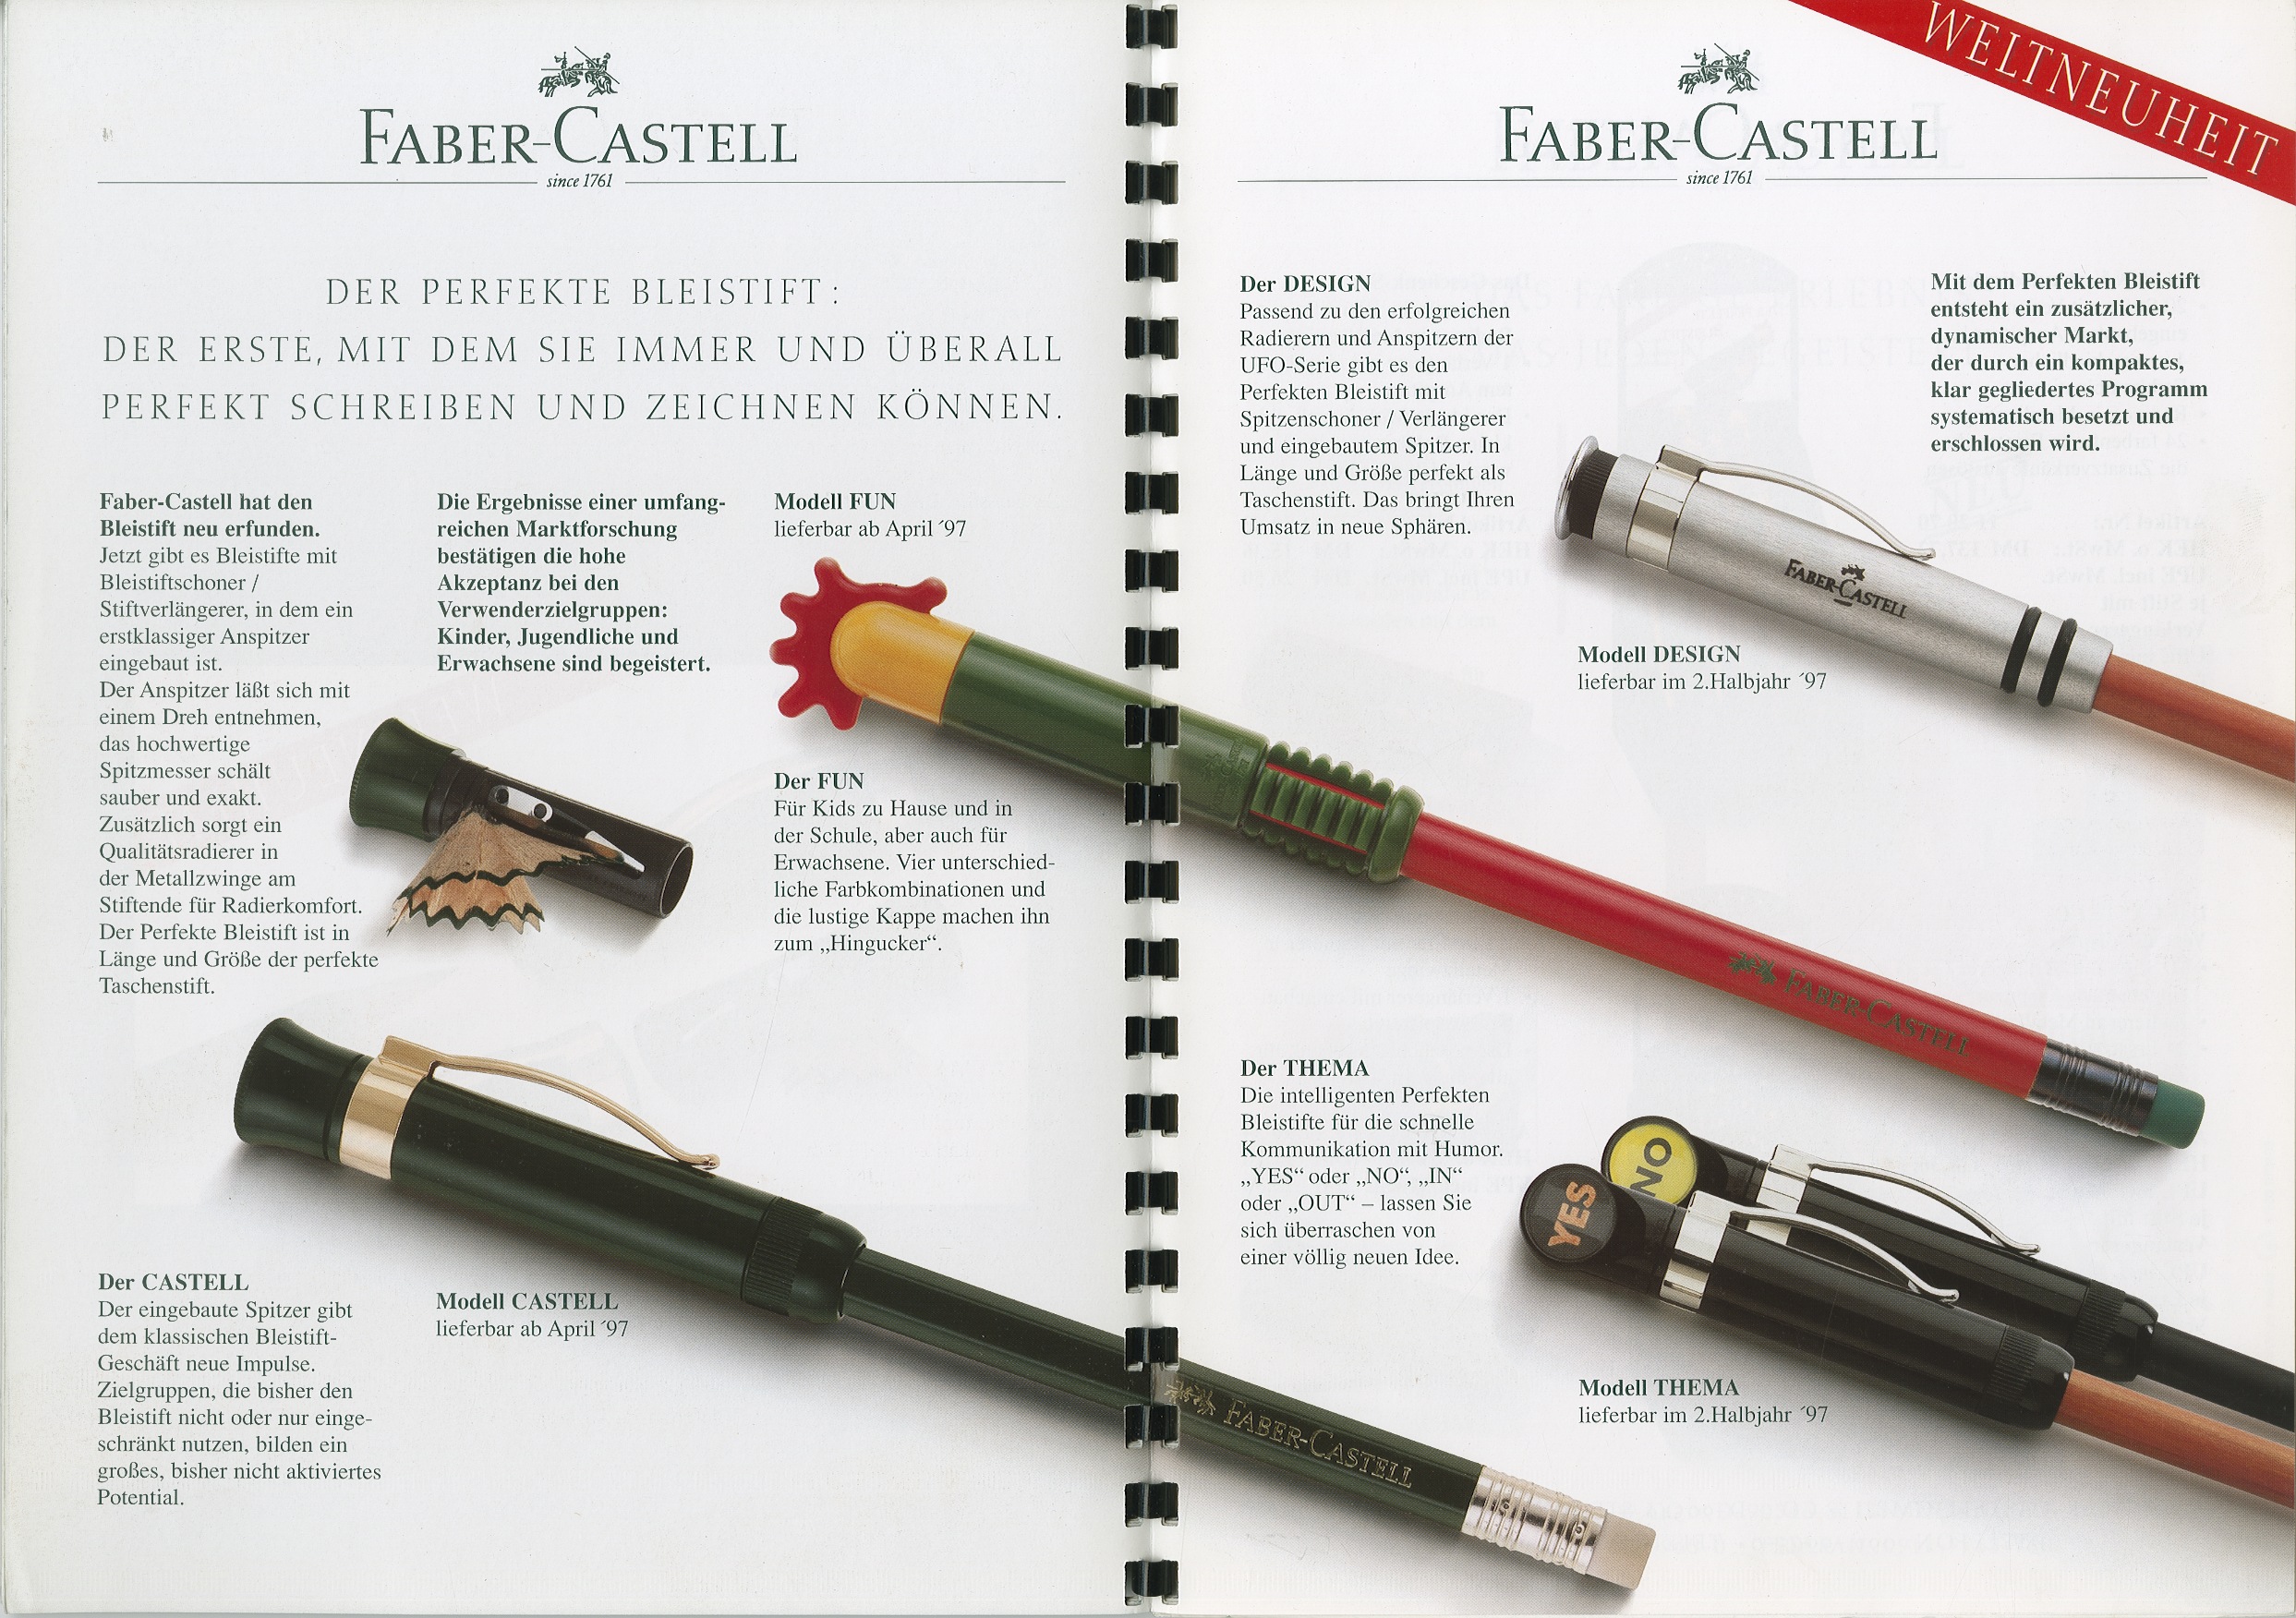 The Perfect Pencil by Faber-Castell - world's most expensive